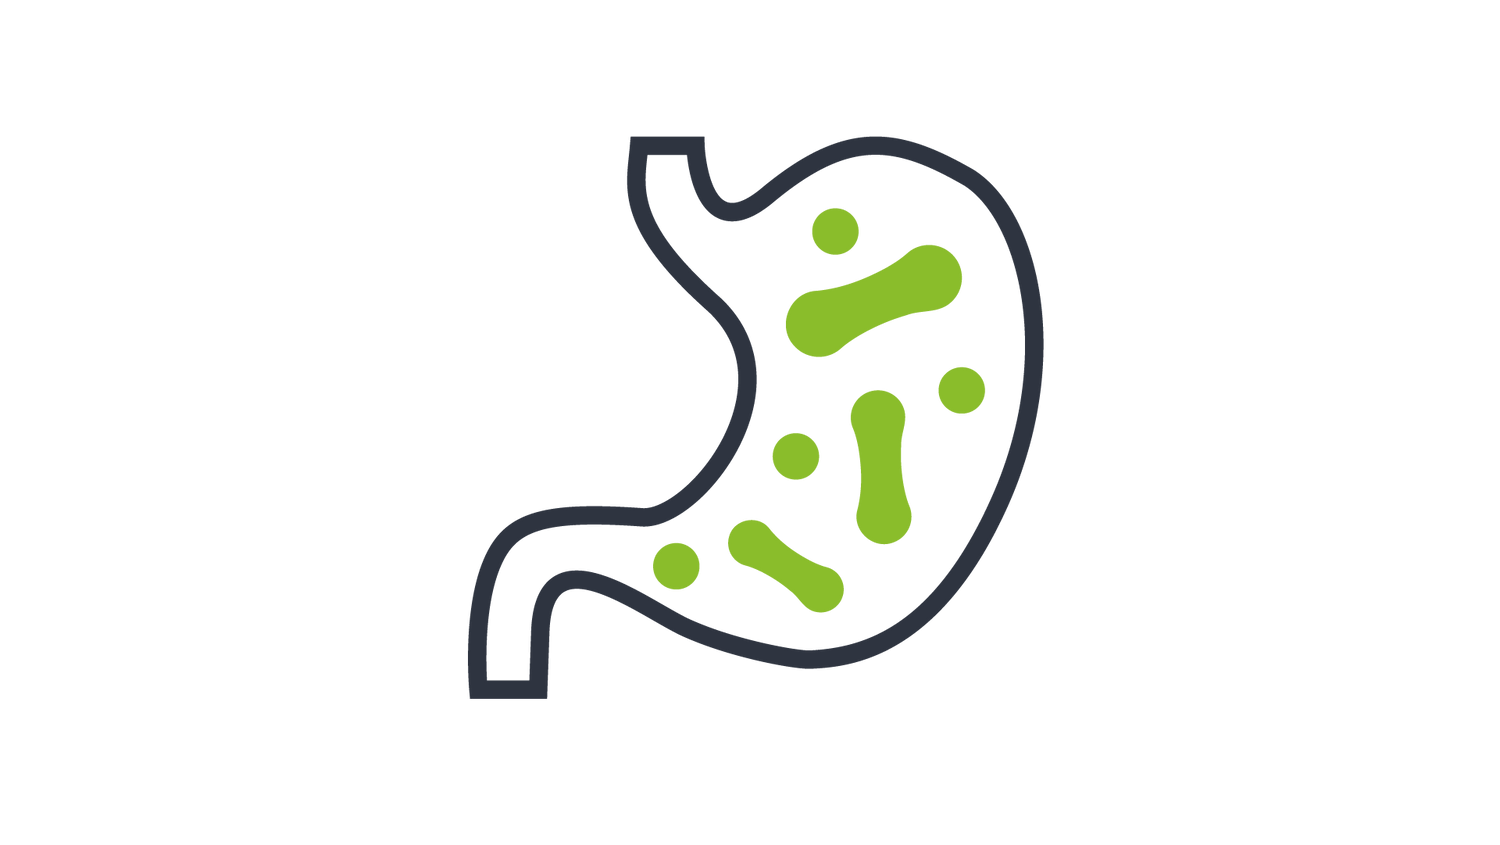 Icon of a dogs stomach with various green shapes in it, representing probiotic bacterias